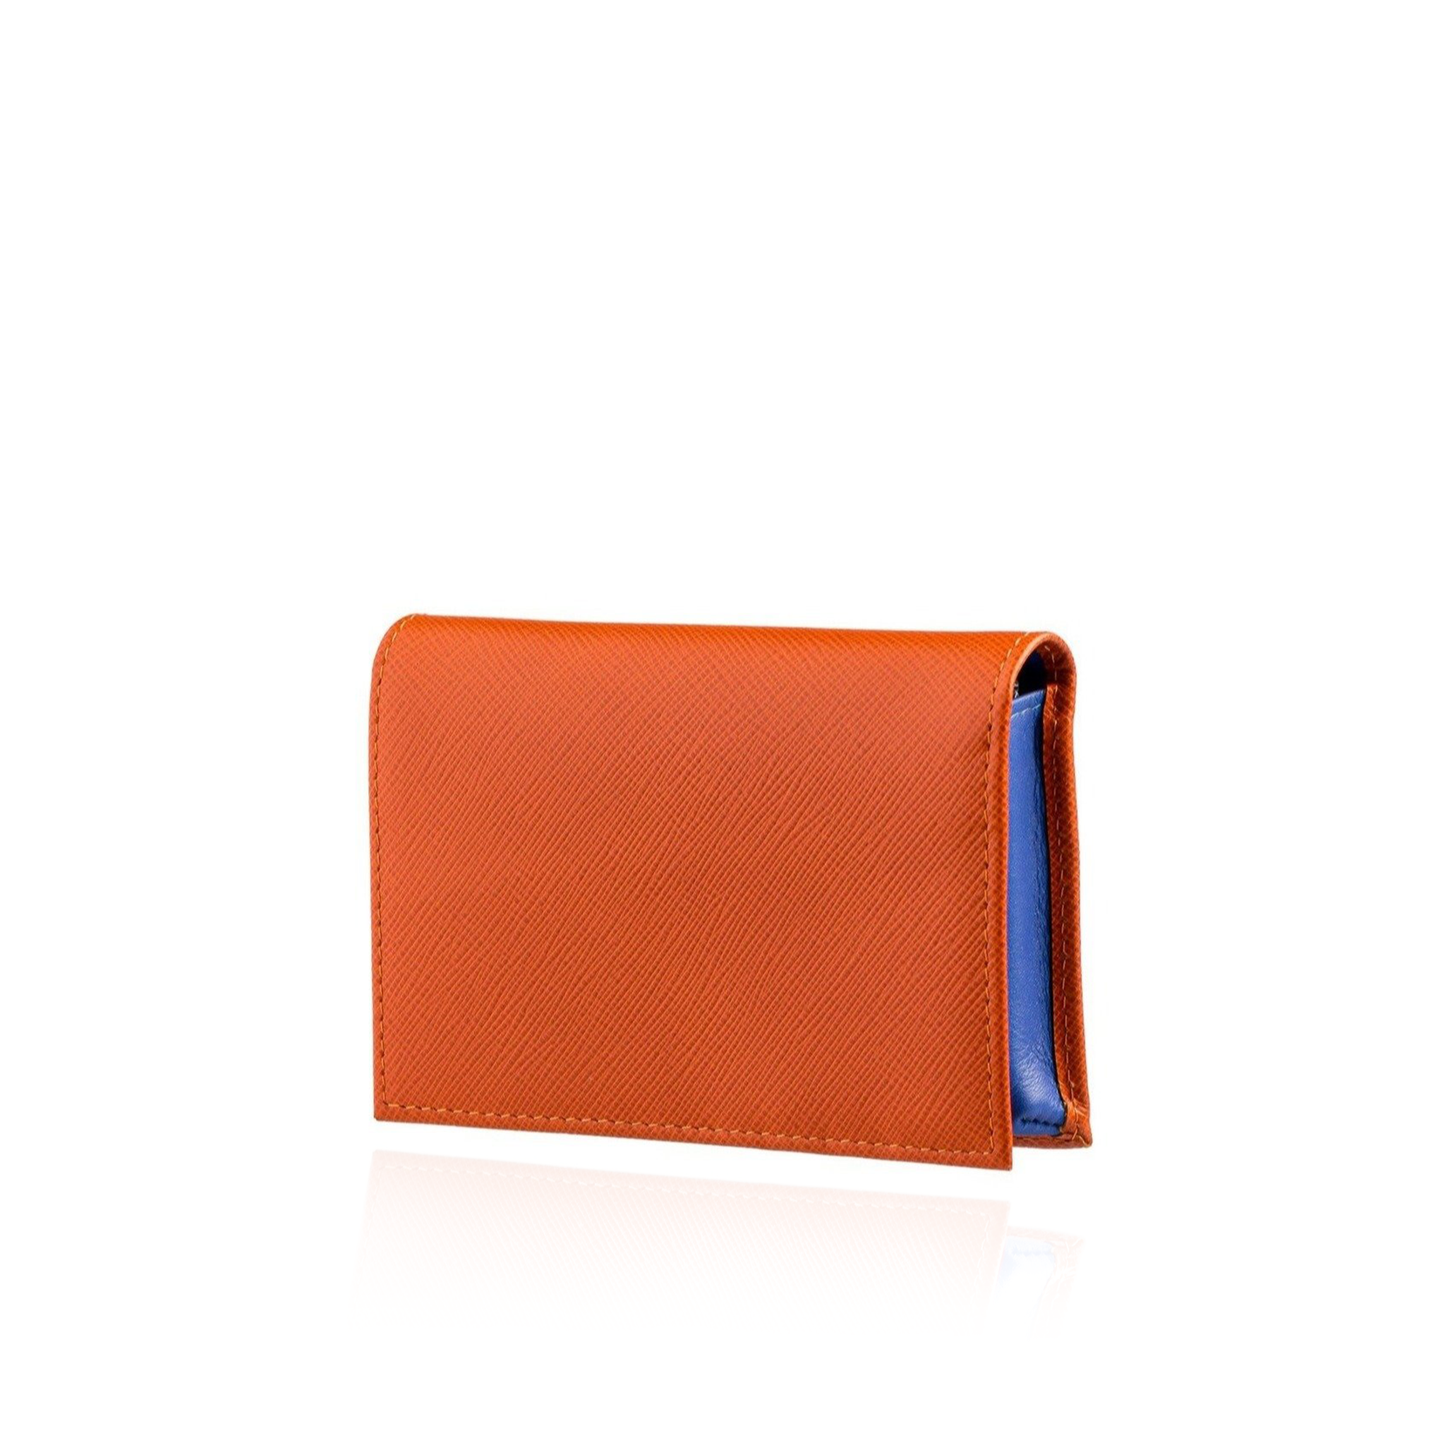 Small Square Bag Zip Front Neon Orange With Coin Purse | SHEIN